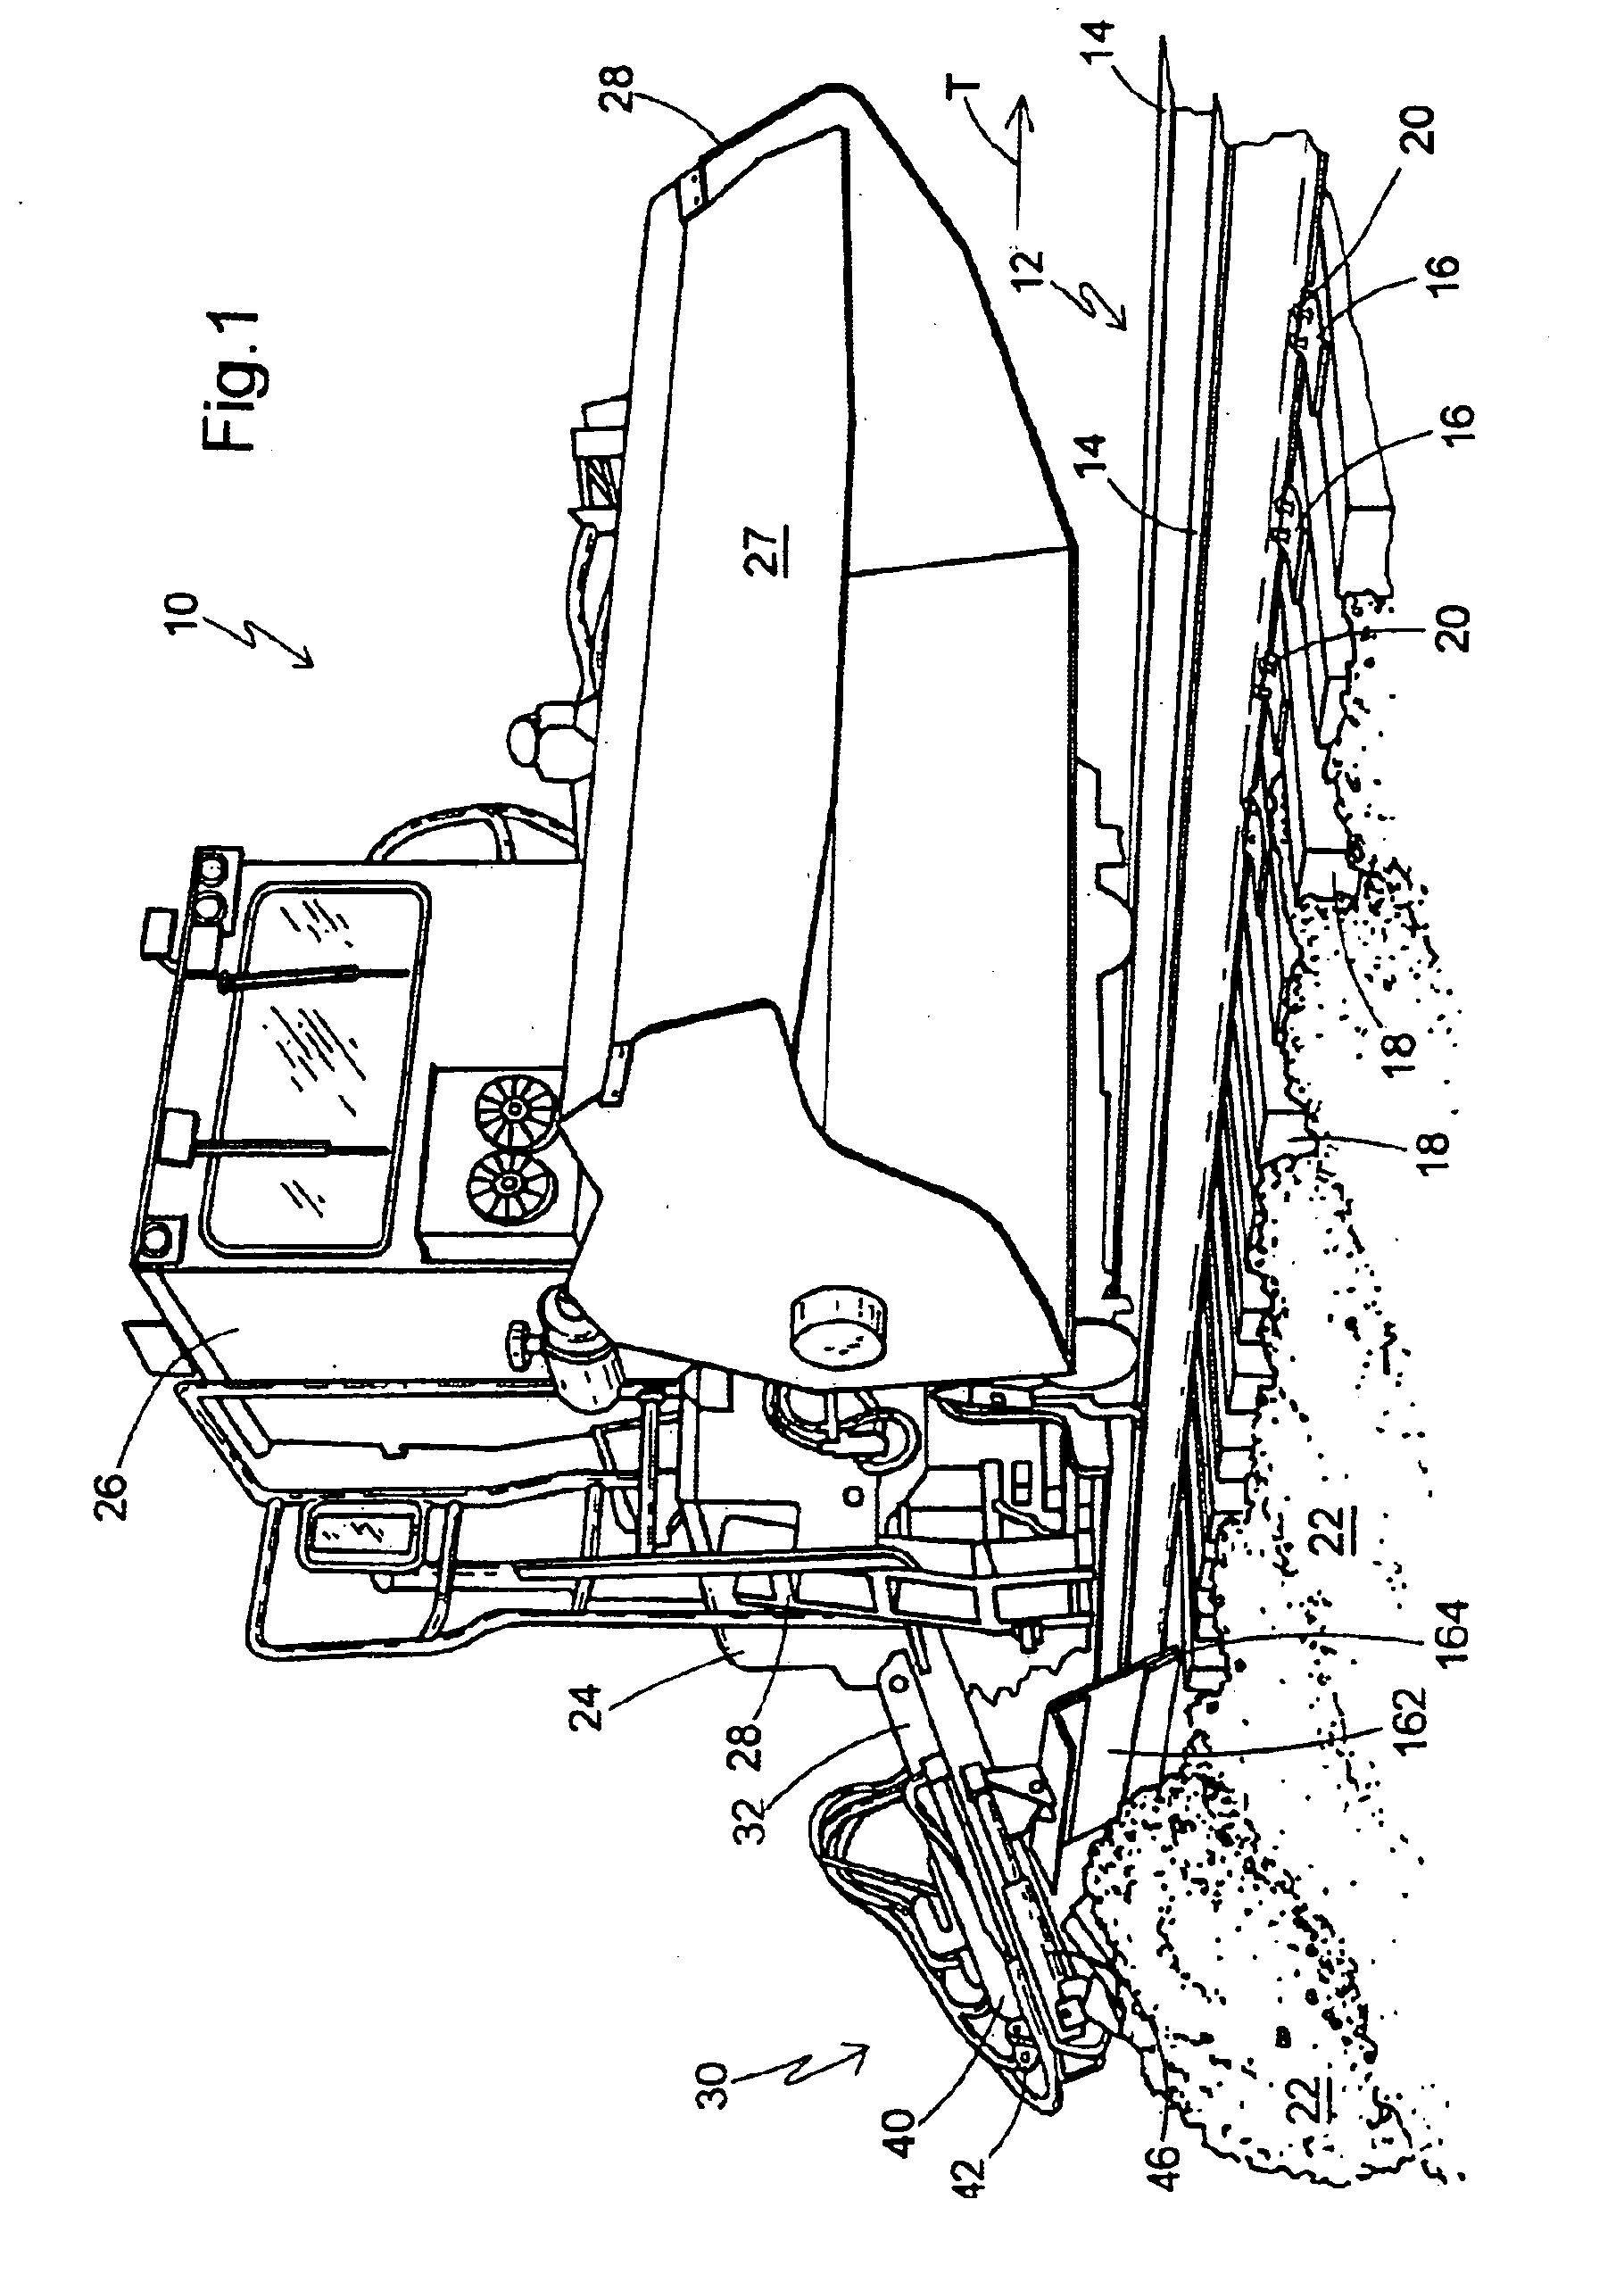 Template door and wing assembly with break-away feature for rail ballast regulator